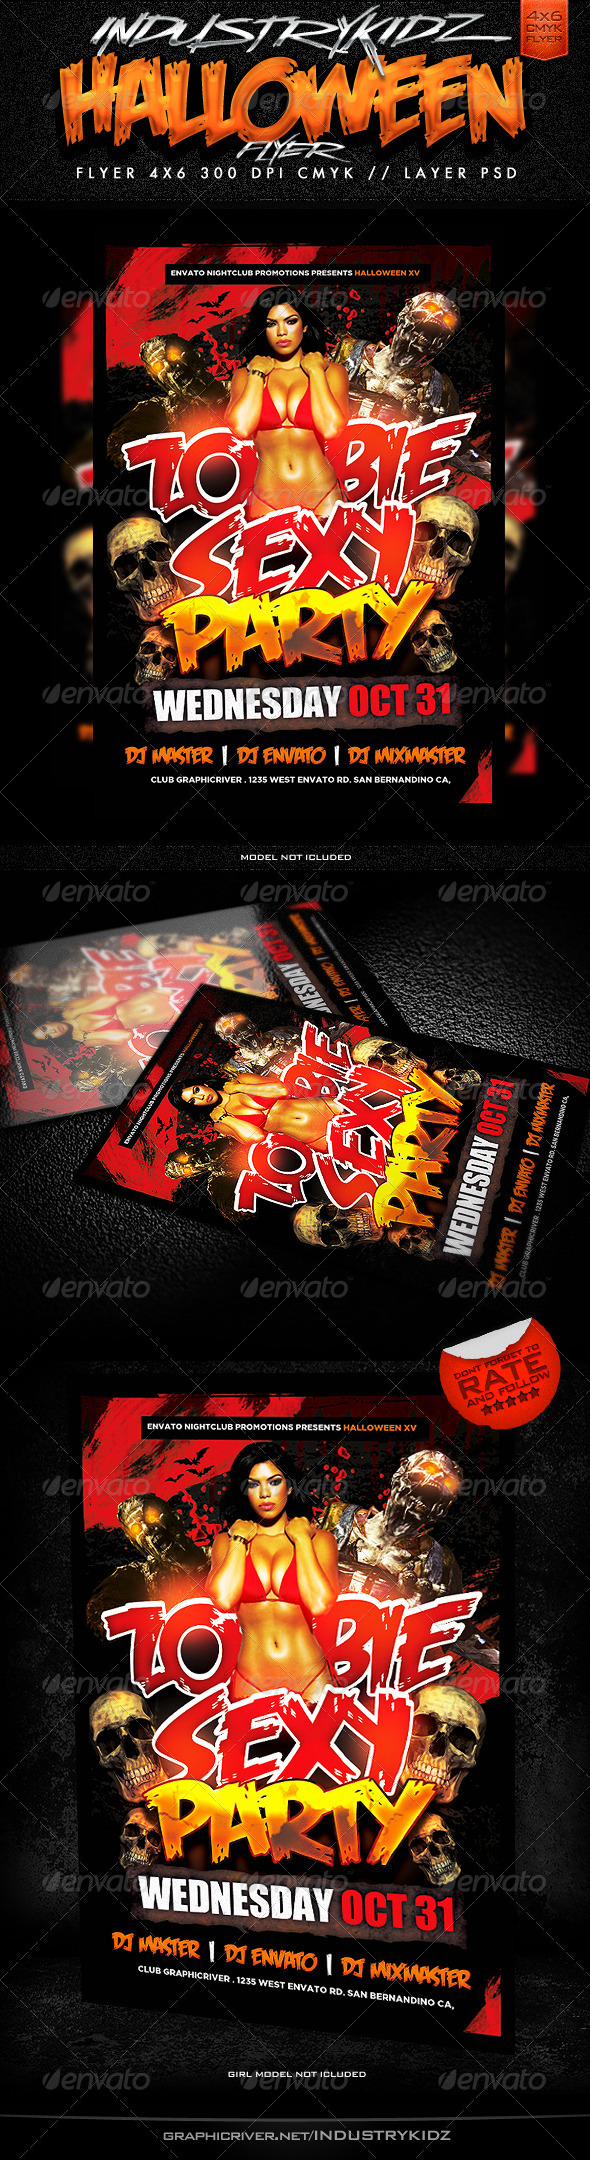 Zombie Sexy Party Flyer Template